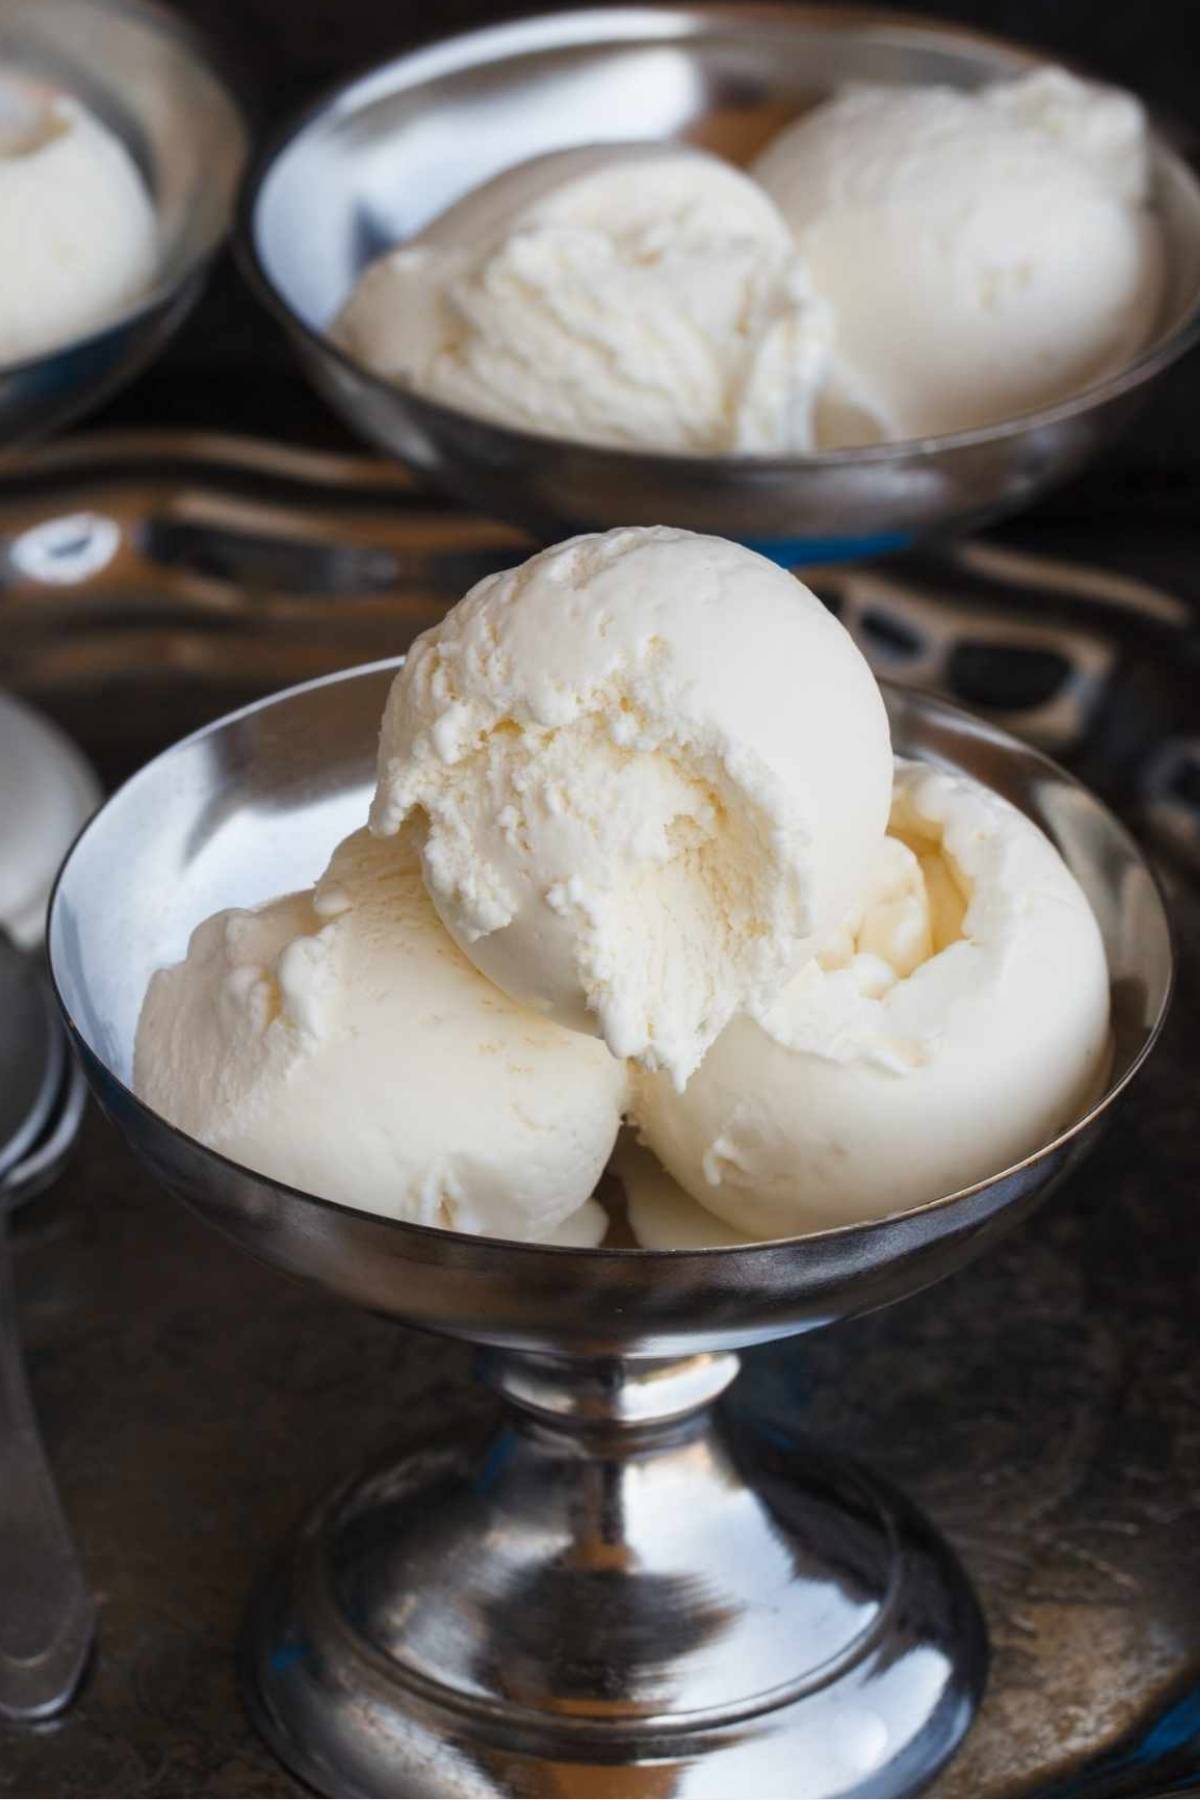 You don't need a fancy ice cream maker to enjoy homemade ice cream. We’ll show you how easy it is to make ice cream in a bag! All you need are just 3 ingredients and two Ziploc bags. Ready in 15 minutes, this homemade treat will be perfect for those hot summer days.